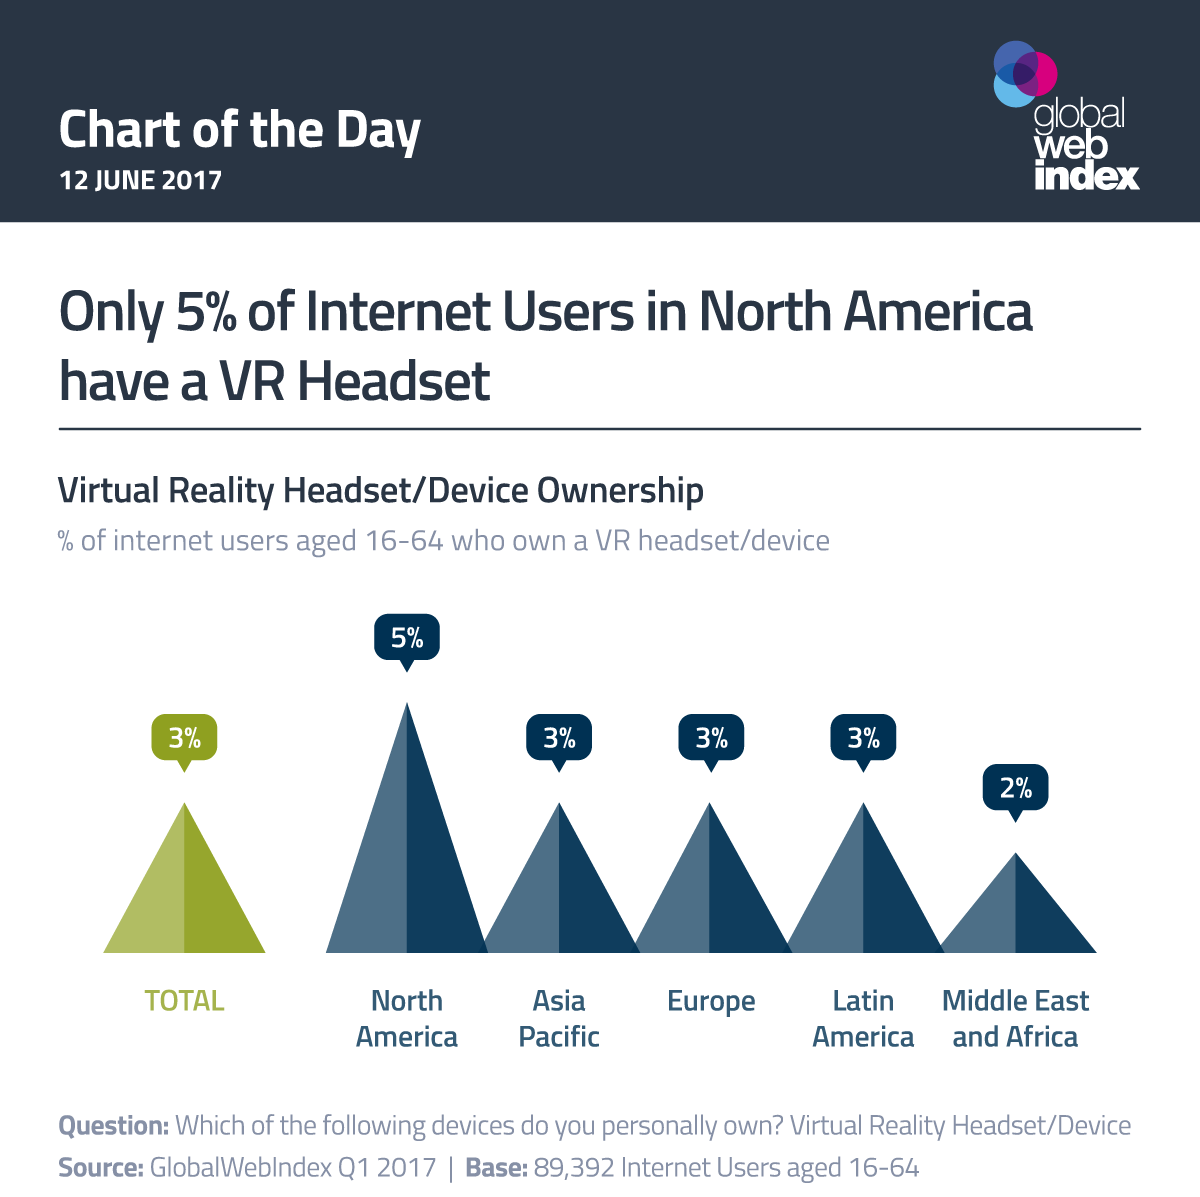 Only 5% of Internet Users in North America have a VR Headset 